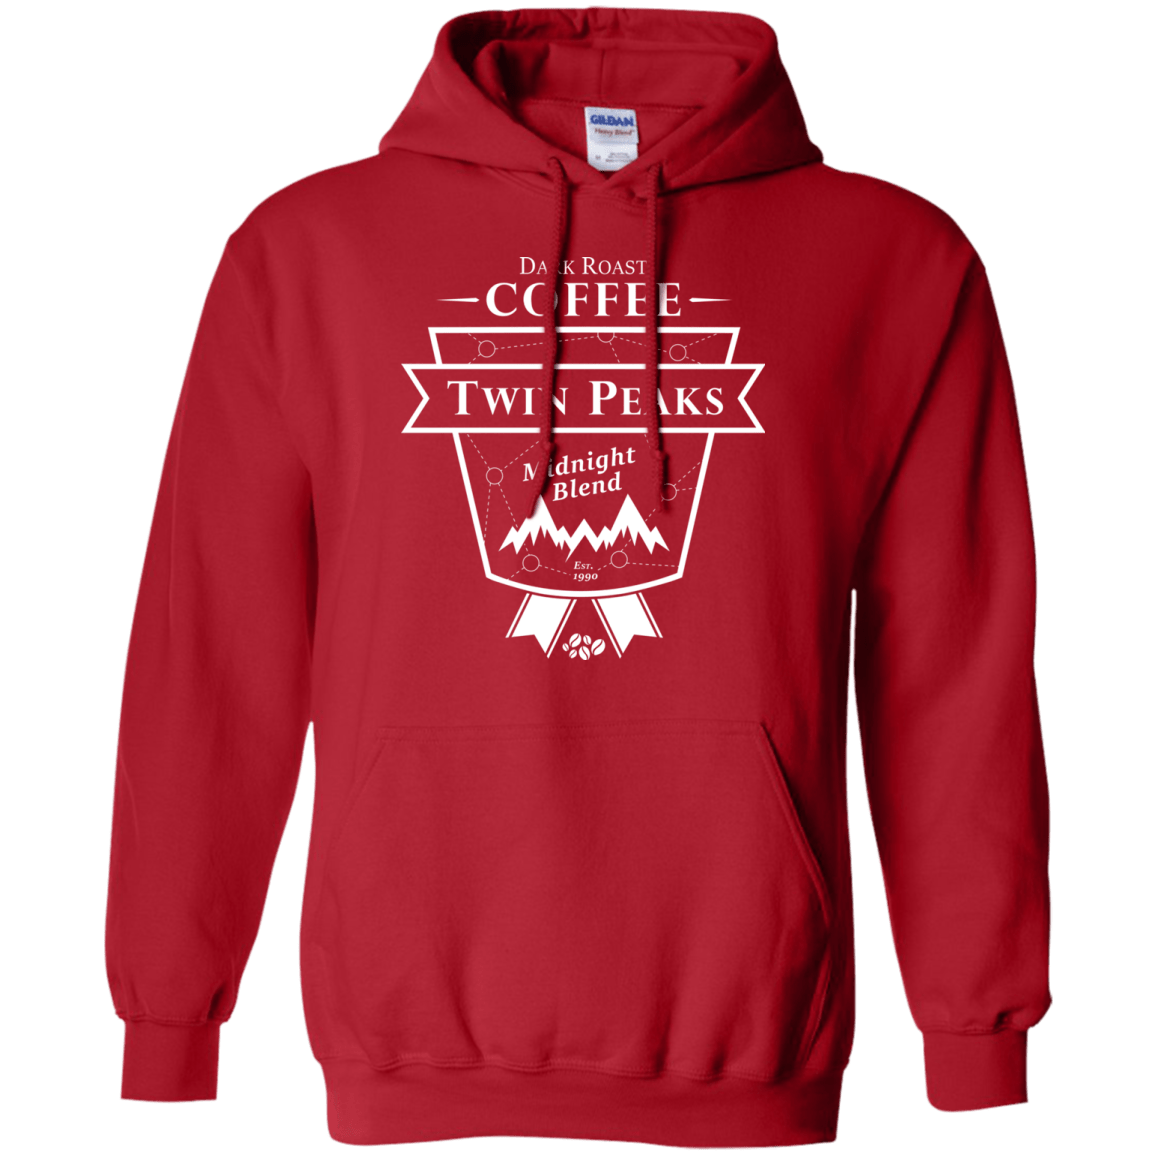 Sweatshirts Red / Small Finest Black Pullover Hoodie